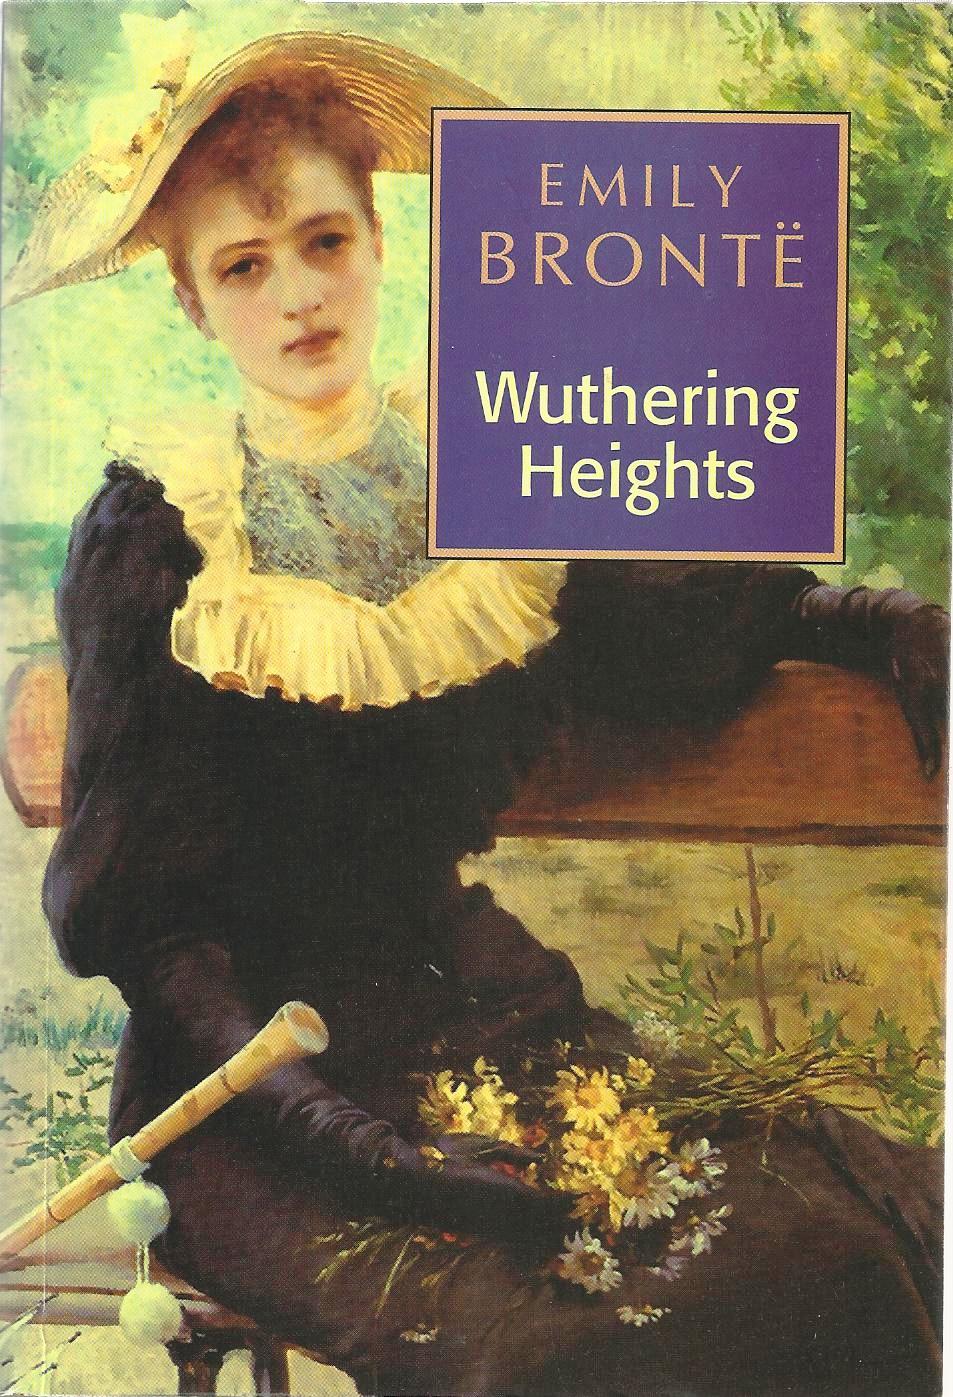 Emily Brontë's Wuthering Heights – in charts